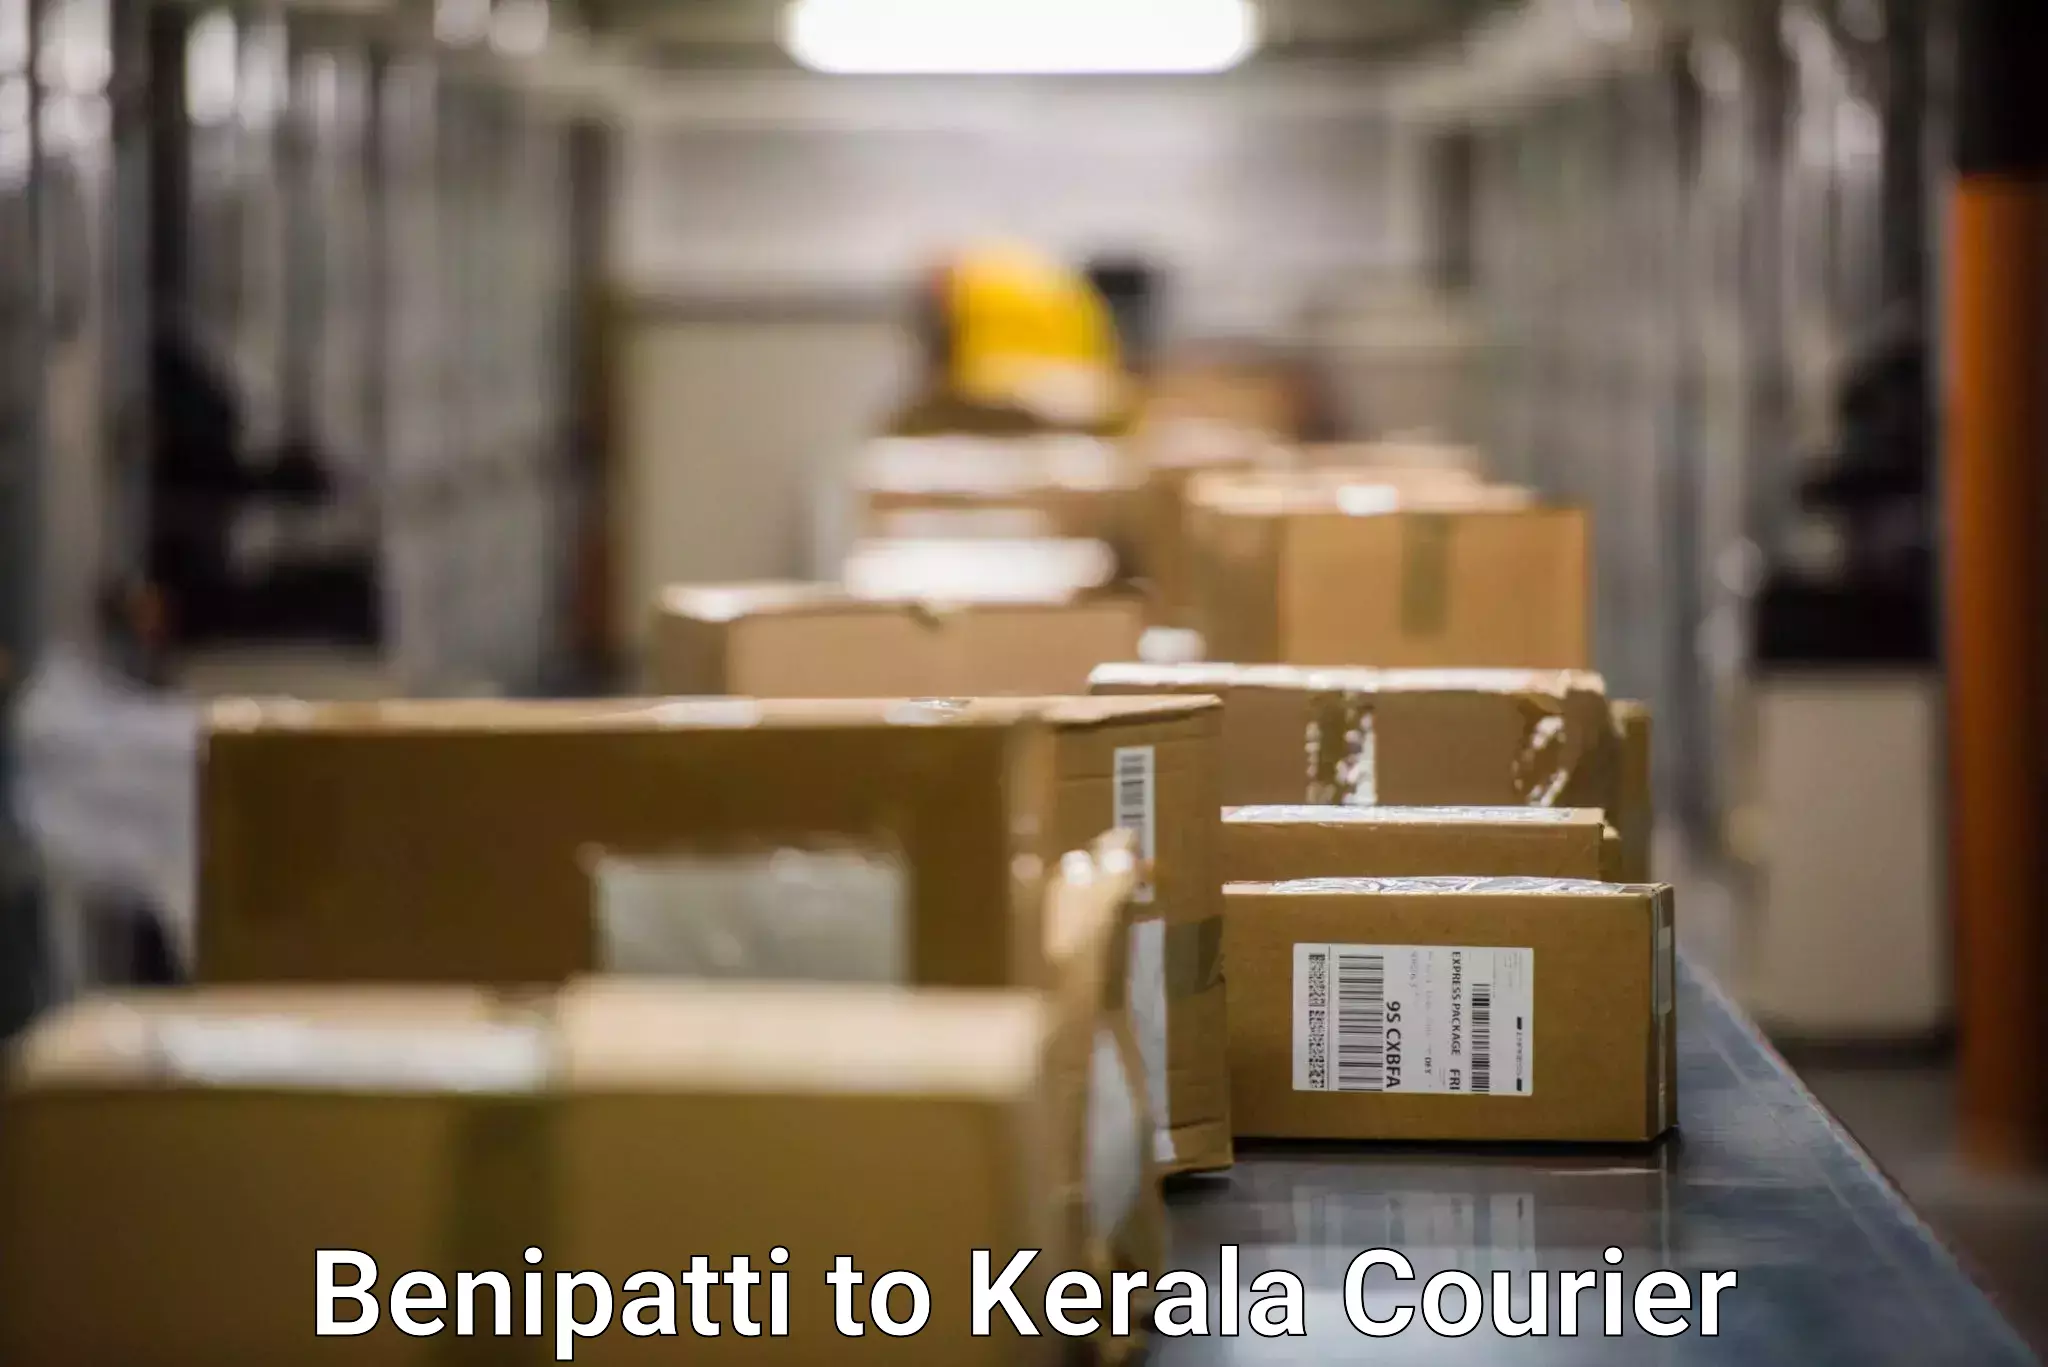 Express delivery network Benipatti to Palai